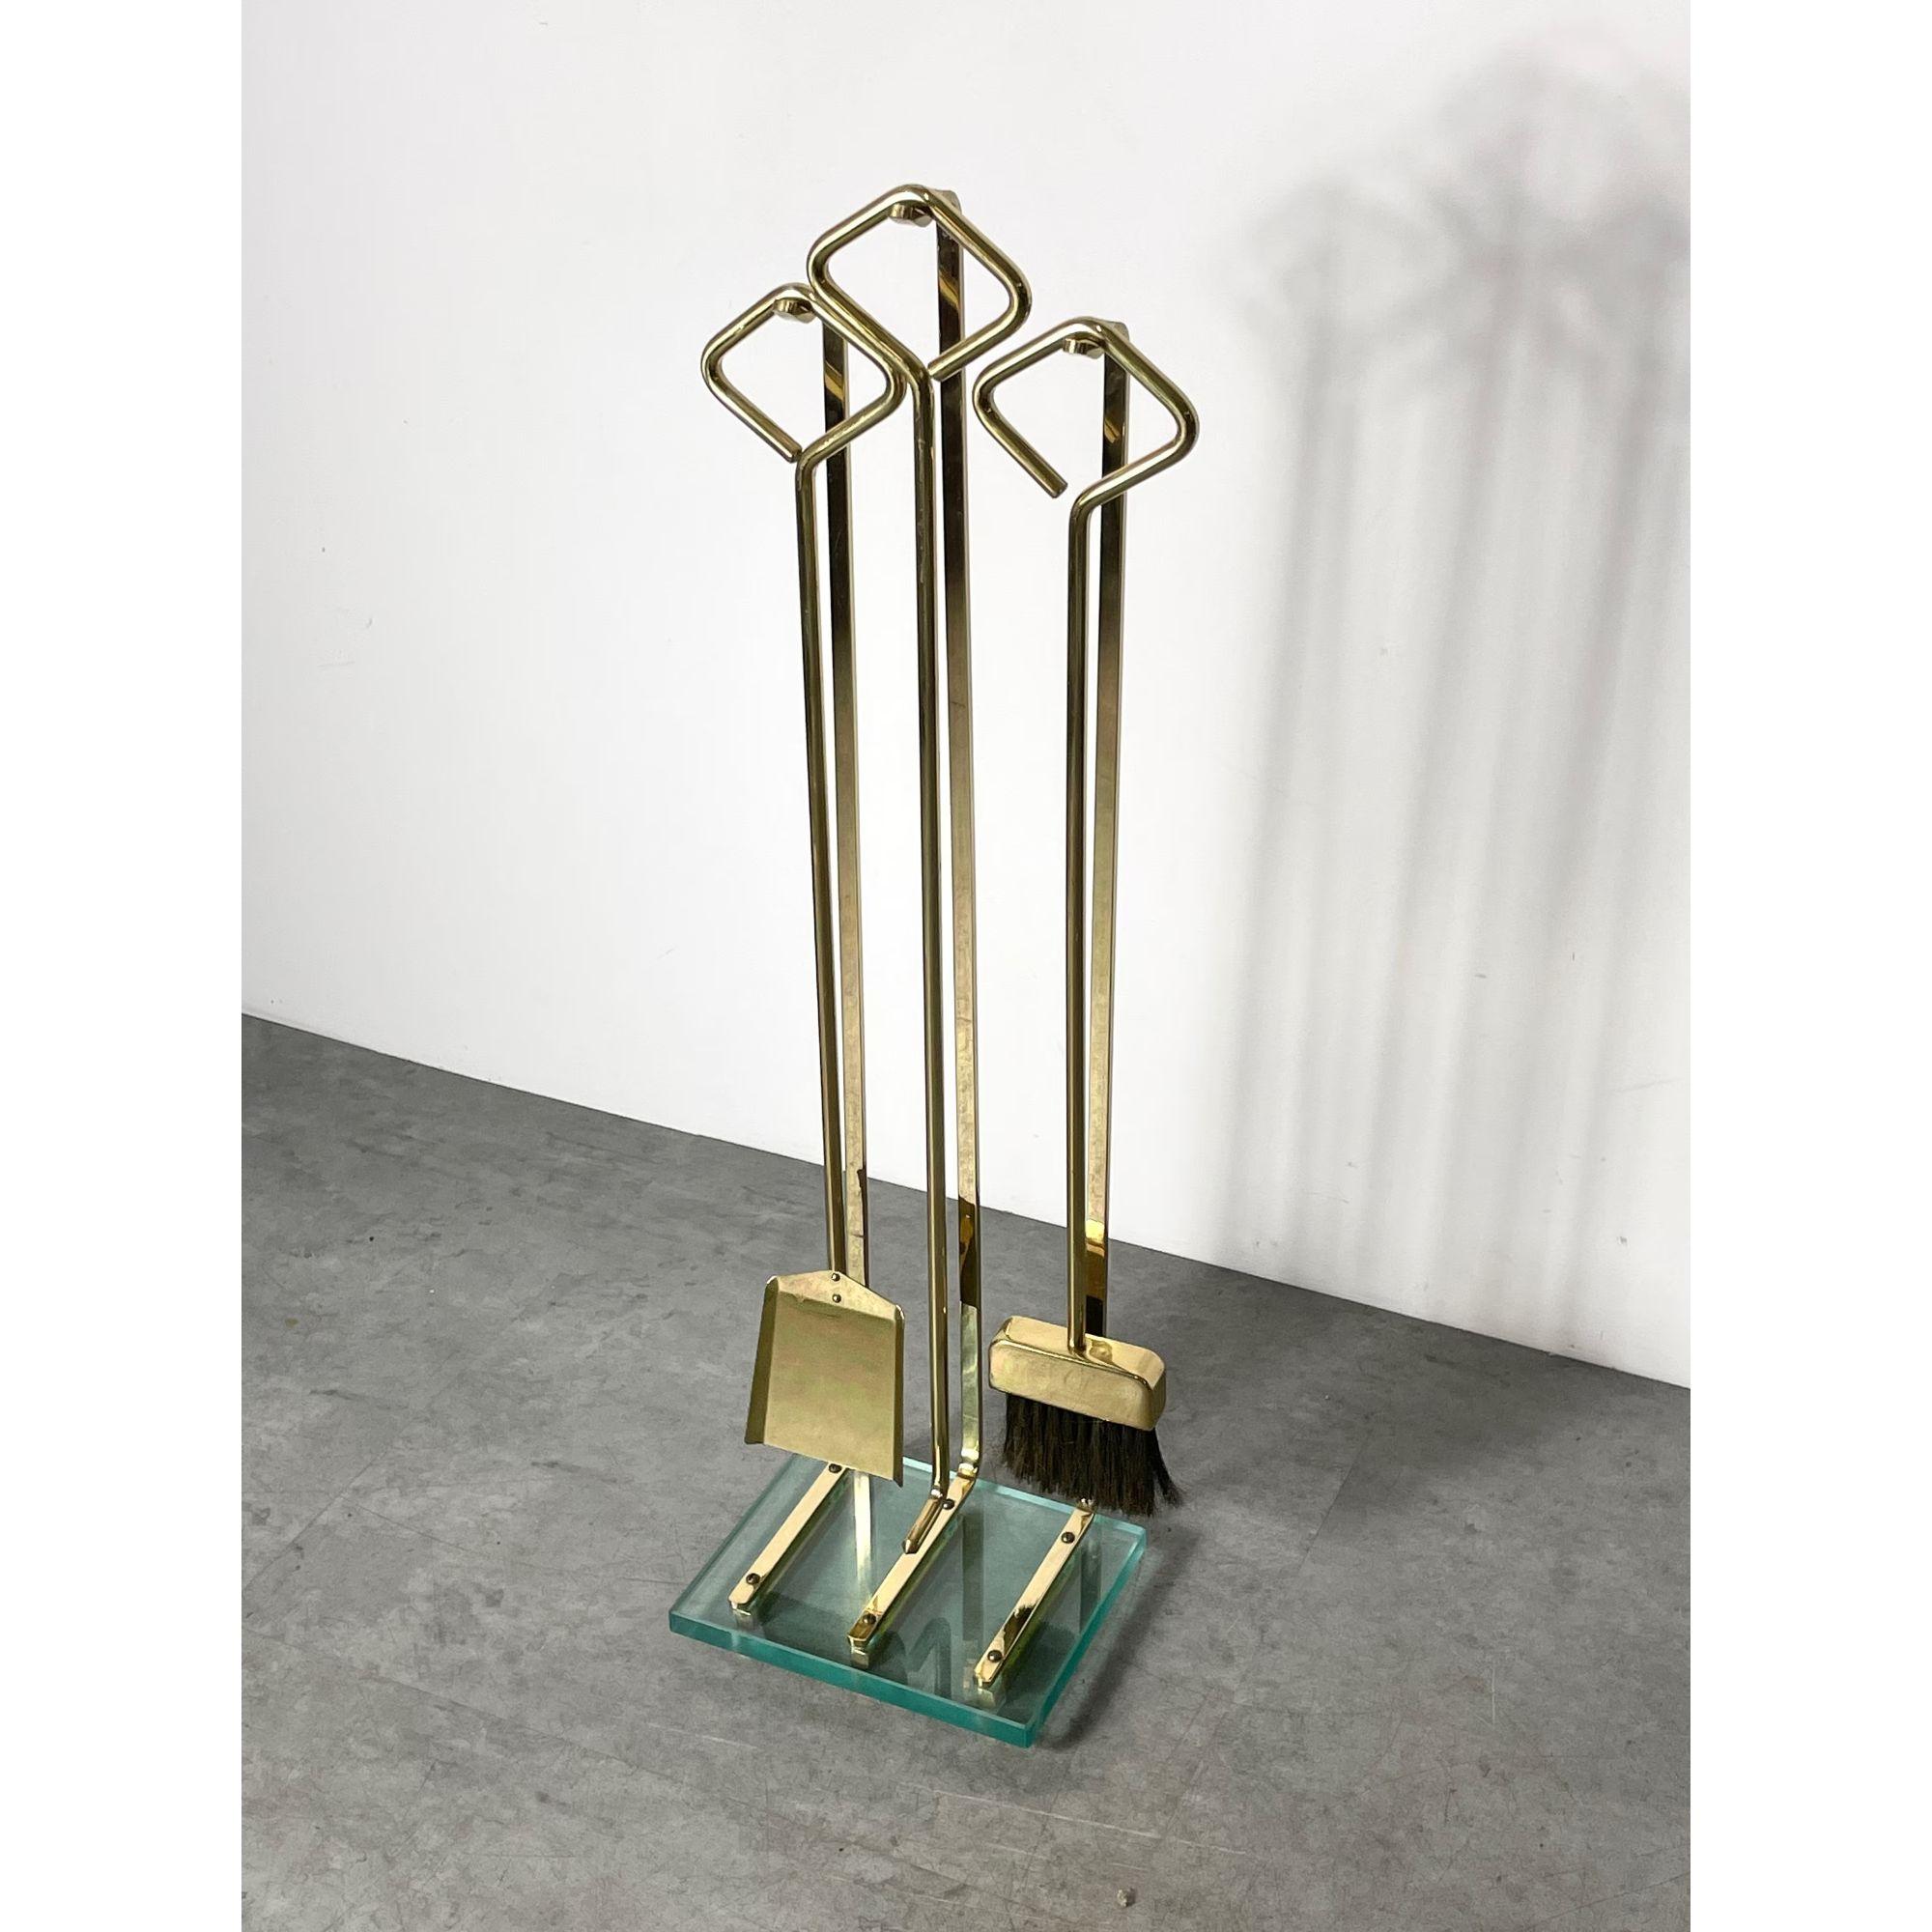 Vintage Italian Modern Brass Glass Fireplace Tools 

Impressive modern fireplace tool set attributed to Fontana Arte circa 1970s
Solid polished brass tools and stand with heavy glass base
Includes shovel poker and brush

Additional